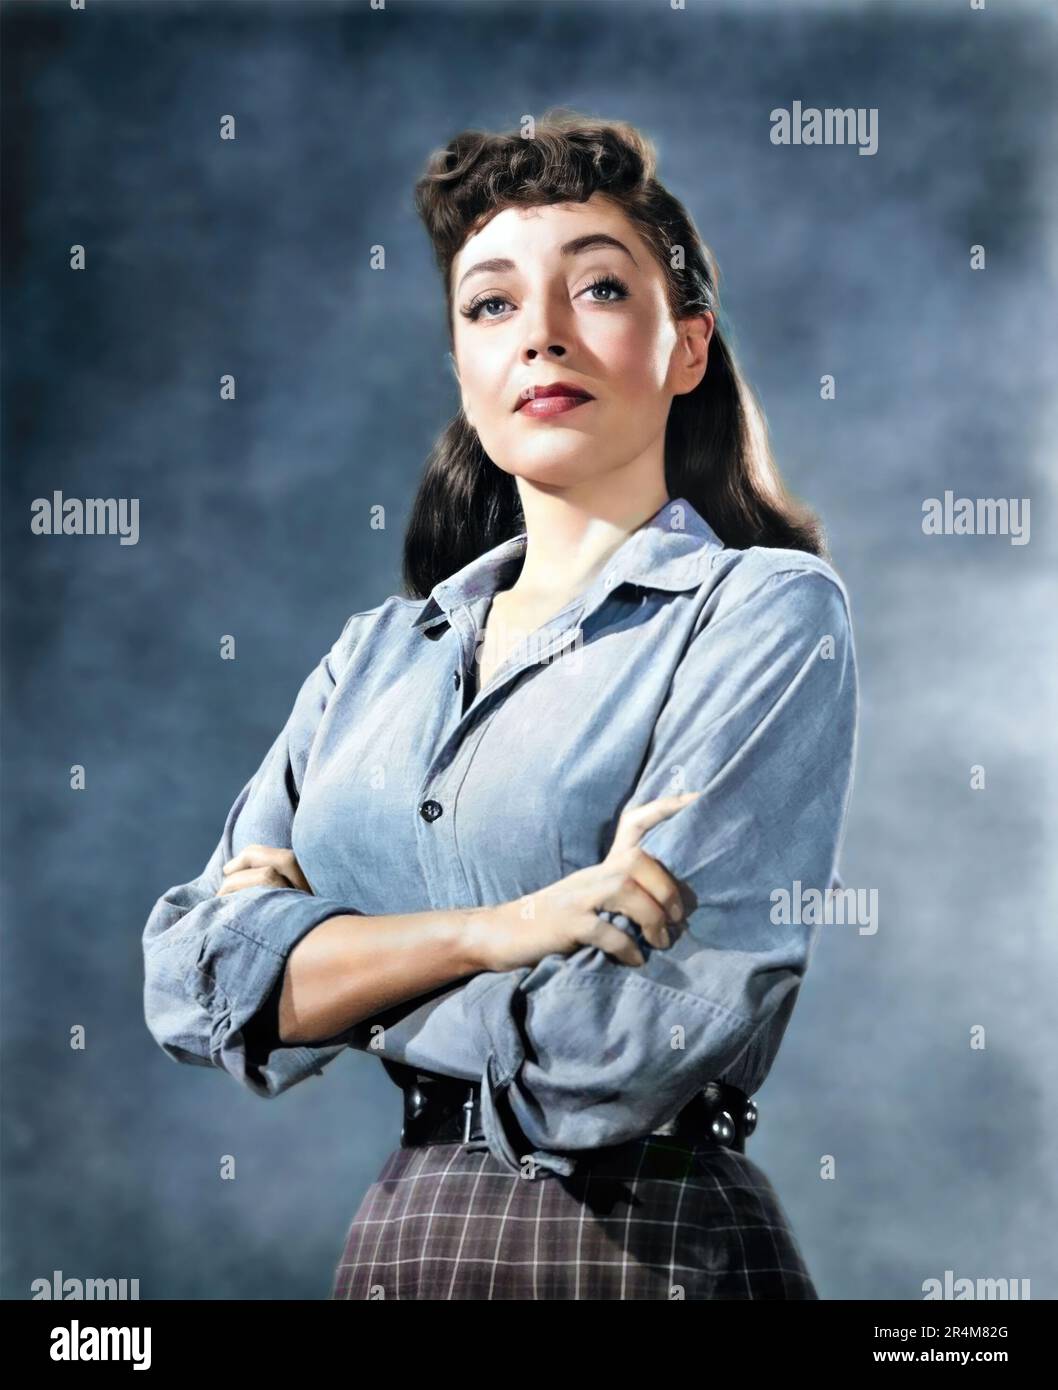 MARIE WINDSOR in DAY OF THE BAD MAN (1958), directed by HARRY KELLER. Credit: UNIVERSAL INTERNATIONAL / Album Stock Photo